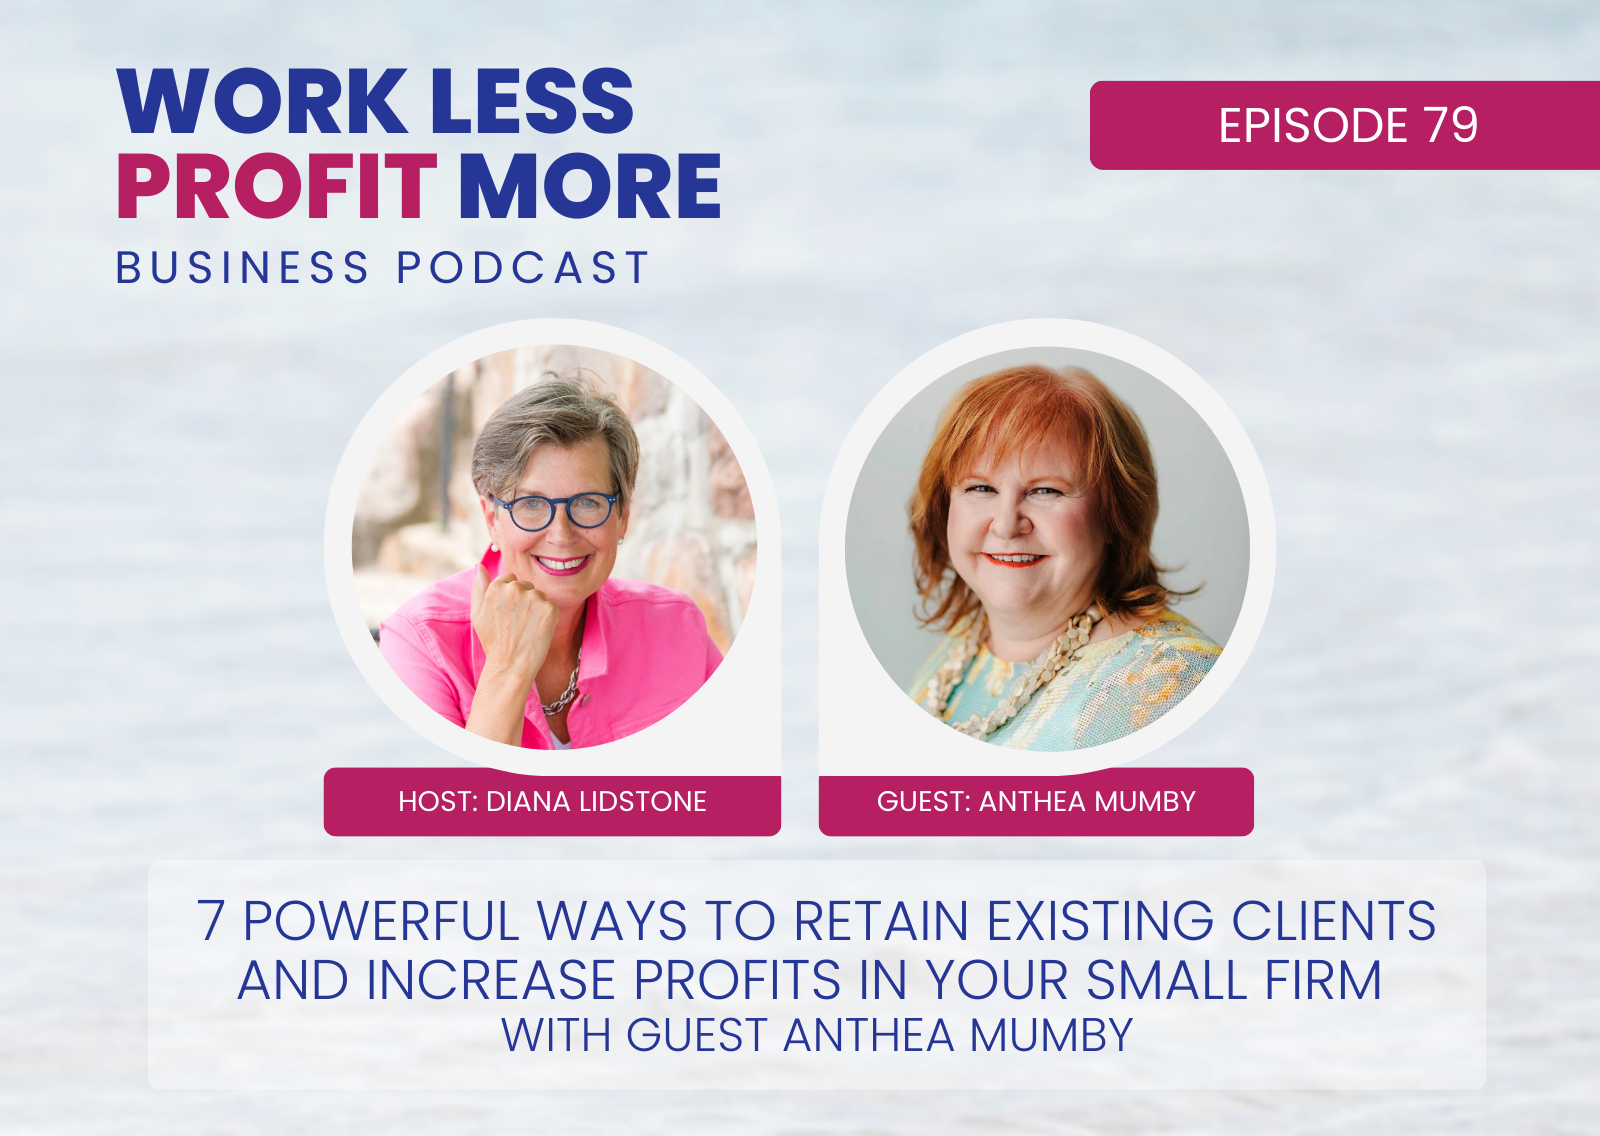 7 Powerful Ways to Retain Existing Clients and Increase Profits in Your Small Firm with Guest Anthea Mumby